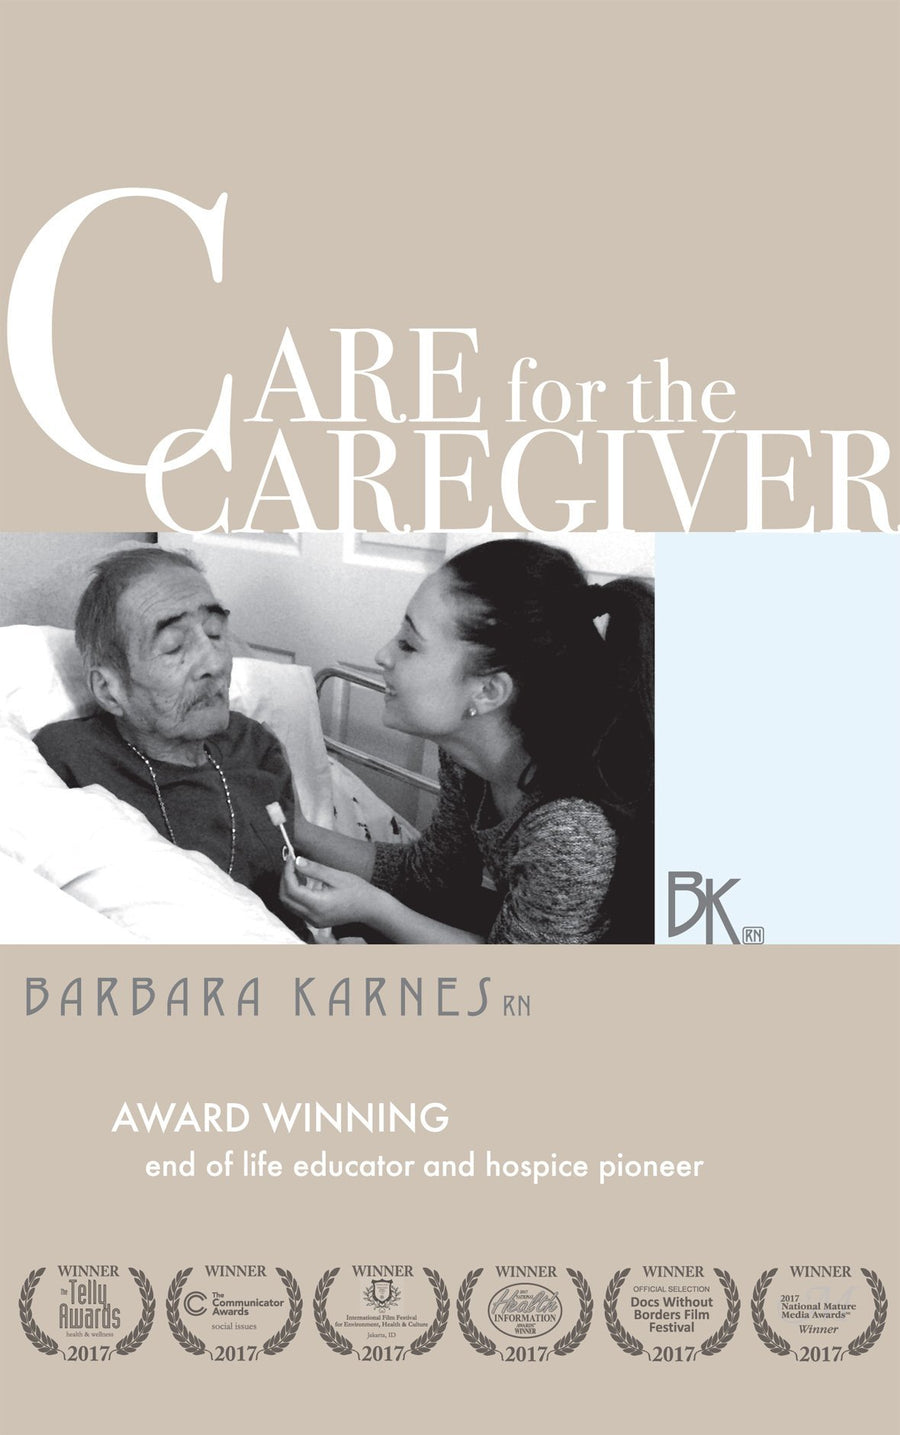  DVD: Care For The Caregiver (28 minutes) by Barbara Karnes, RN  Suggestions for creating a fulfilling work environment, staying balanced and healthy amid constant sadness, and maintaining a happy, engaged personal life.